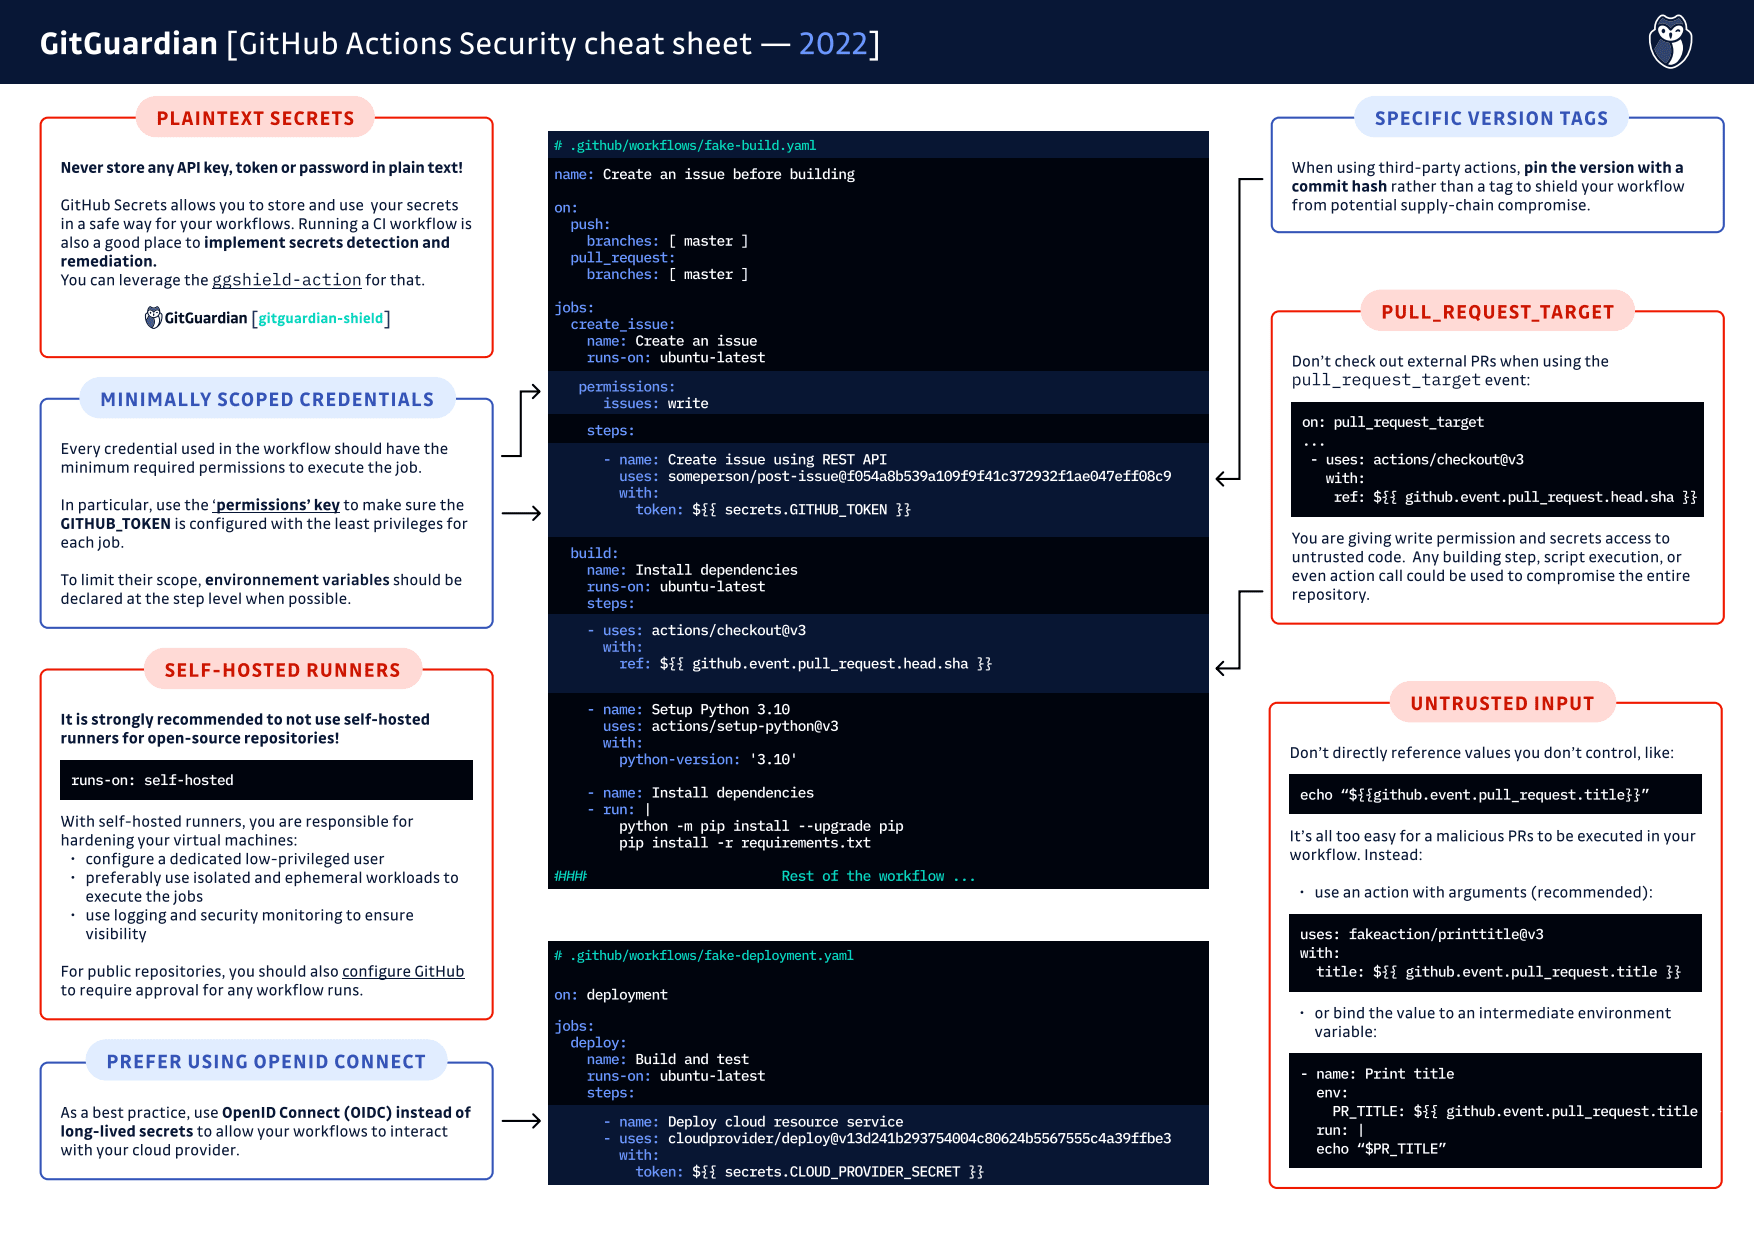 GitHub Actions Security Best Practices [cheat sheet included]